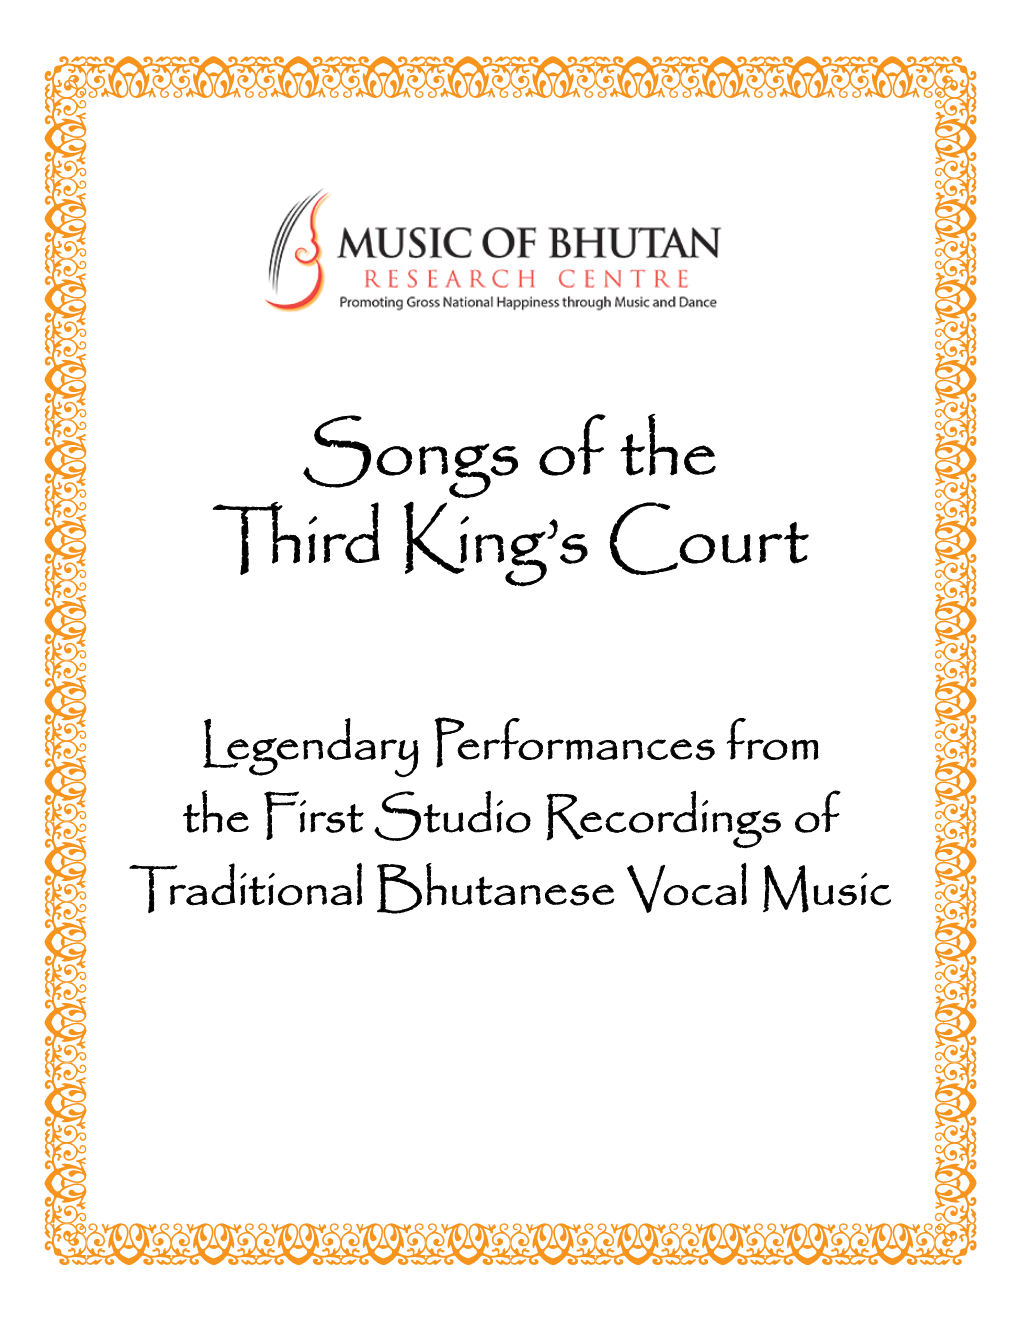 Songs of the Third King's Court